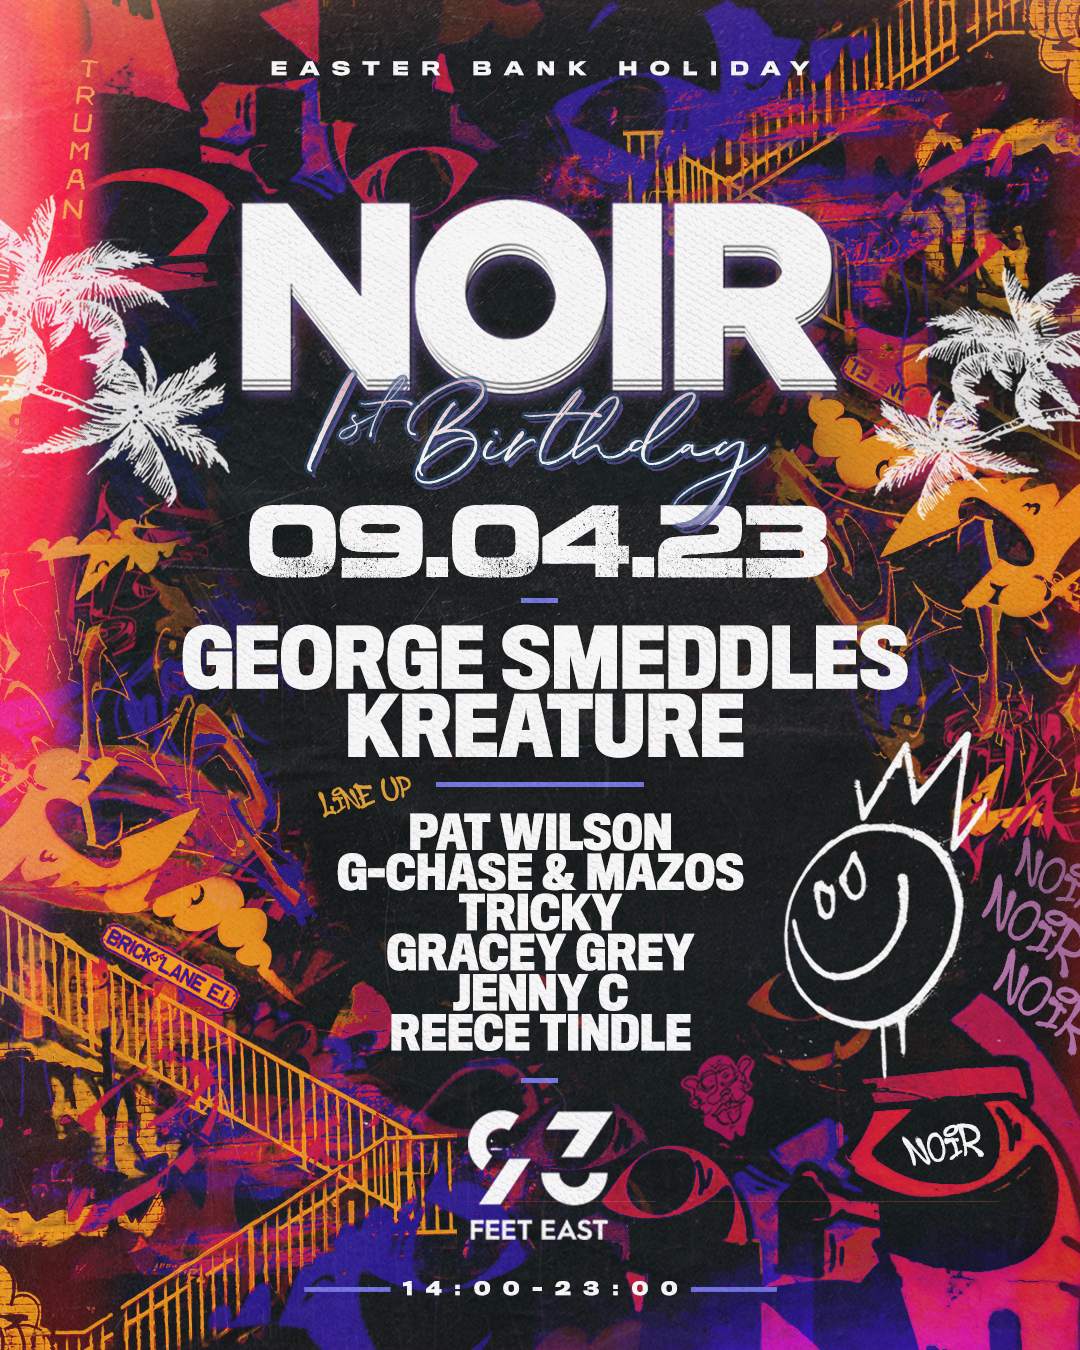 NOIR Easter Sunday w/George Smeddles, Kreature, Pat Wilson, Tricky + Residents - Página trasera